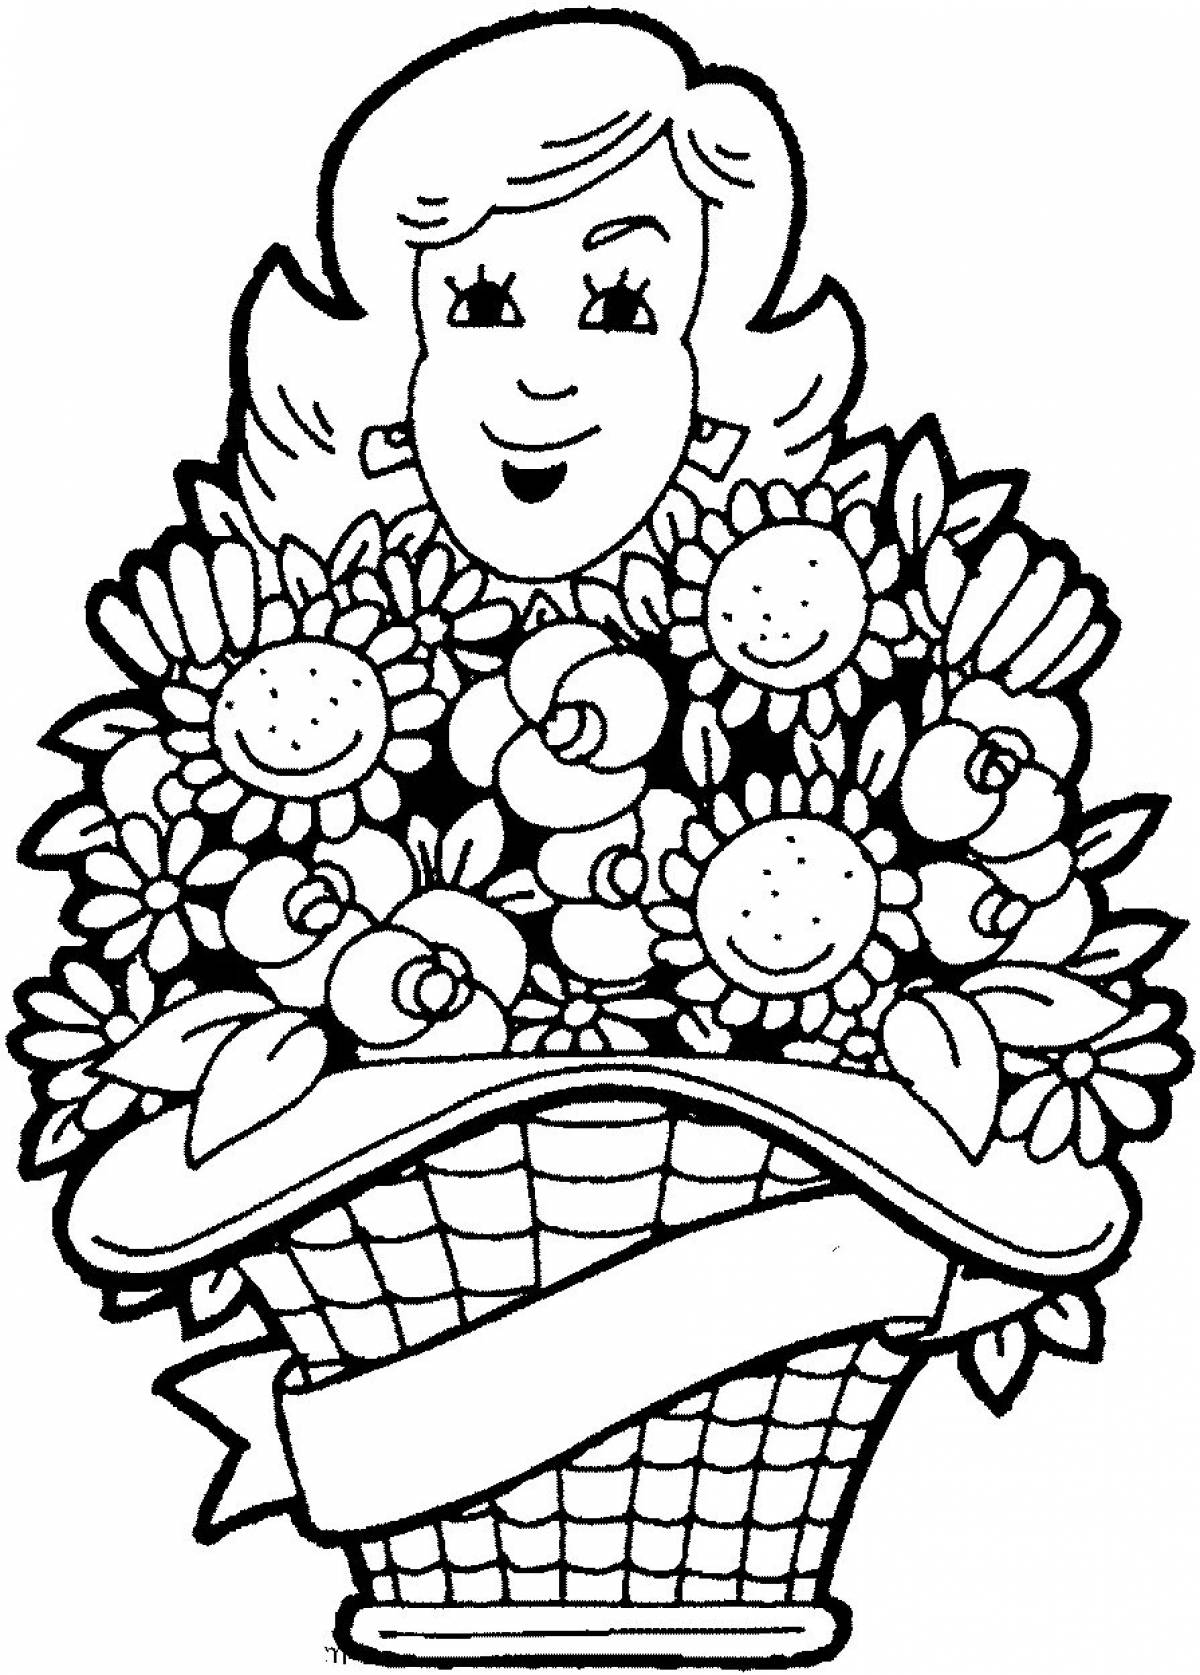 Coloring page luxury bouquet for mom